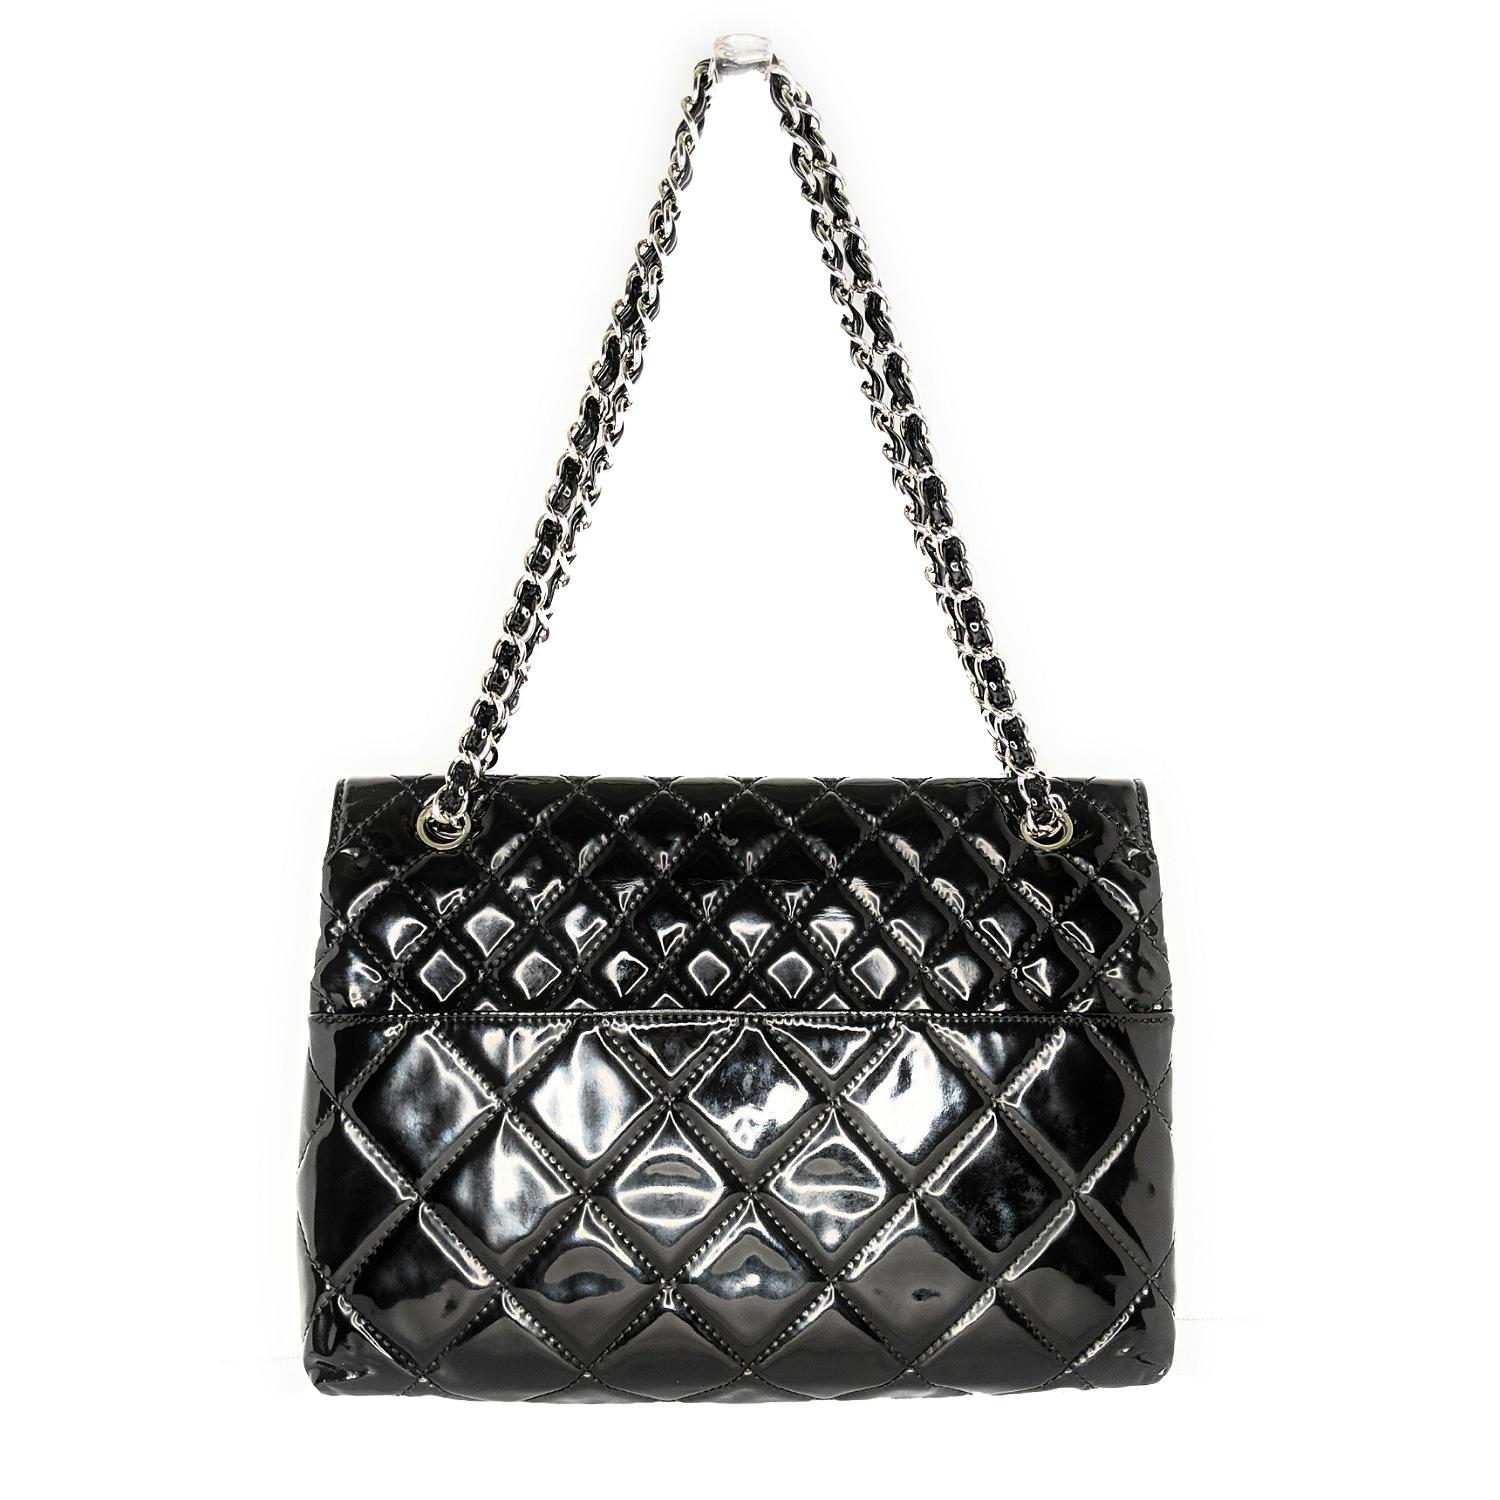 Black quilted patent leather Chanel In The Business shoulder bag with silver-tone hardware, dual convertible chain-link and patent leather shoulder straps, single exterior slit pocket at back, tonal canvas lining, dual pockets at interior wall; one